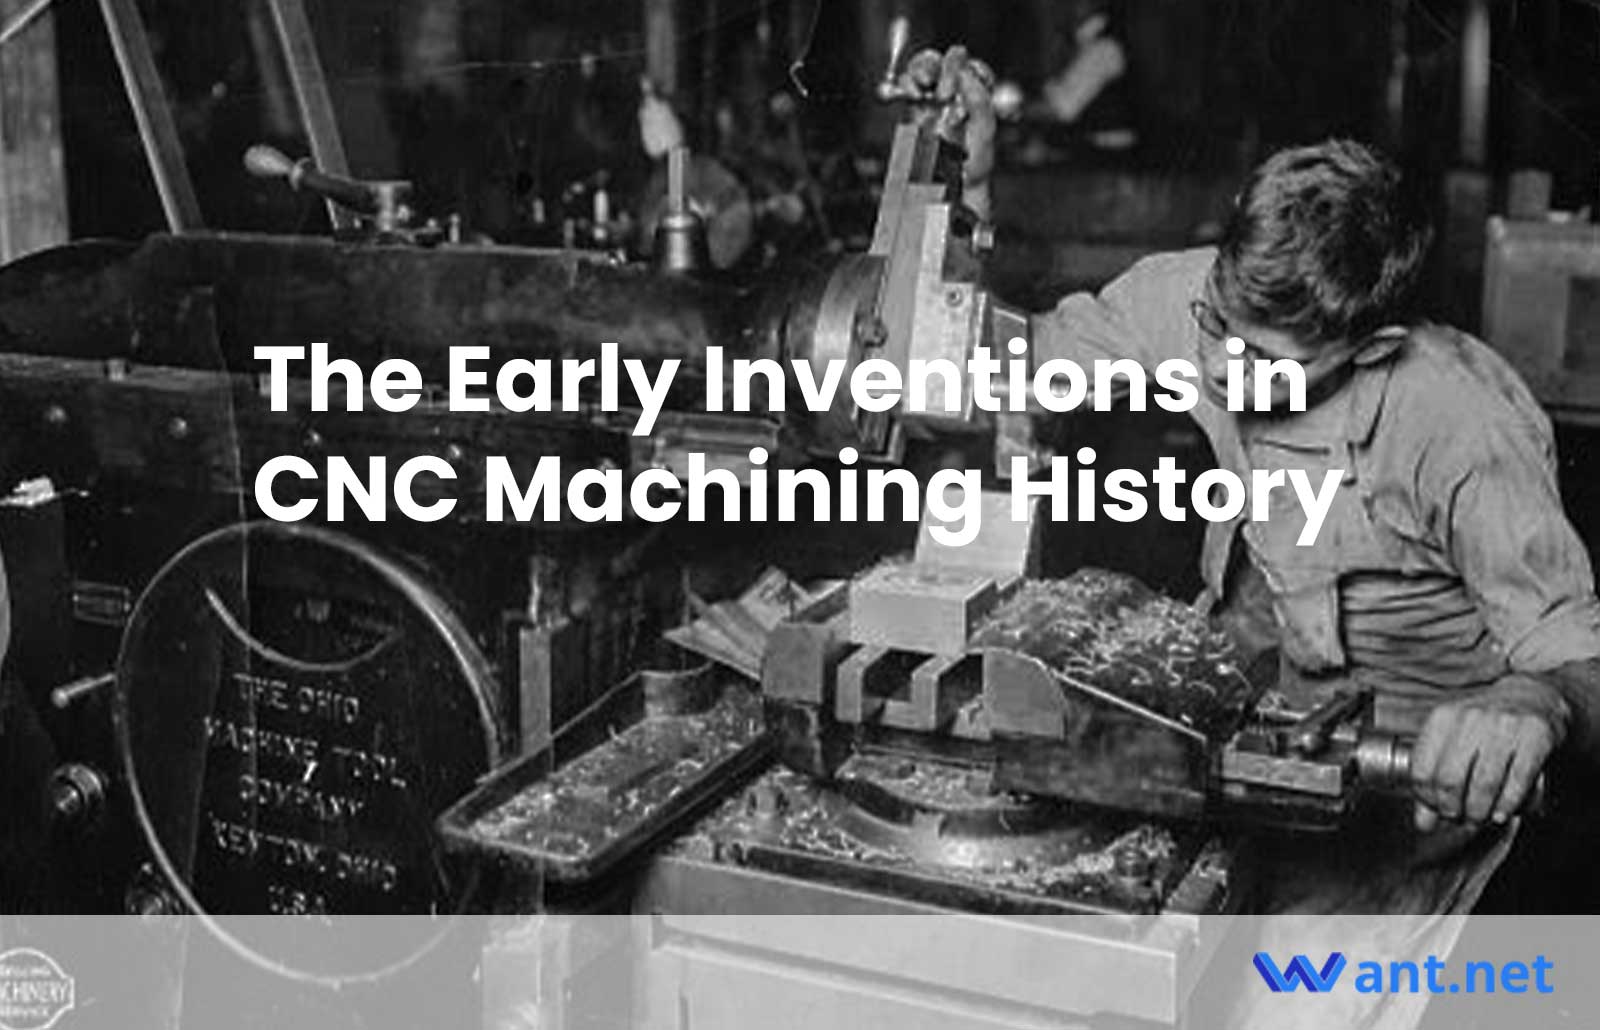 The Early Inventions in CNC Machining History